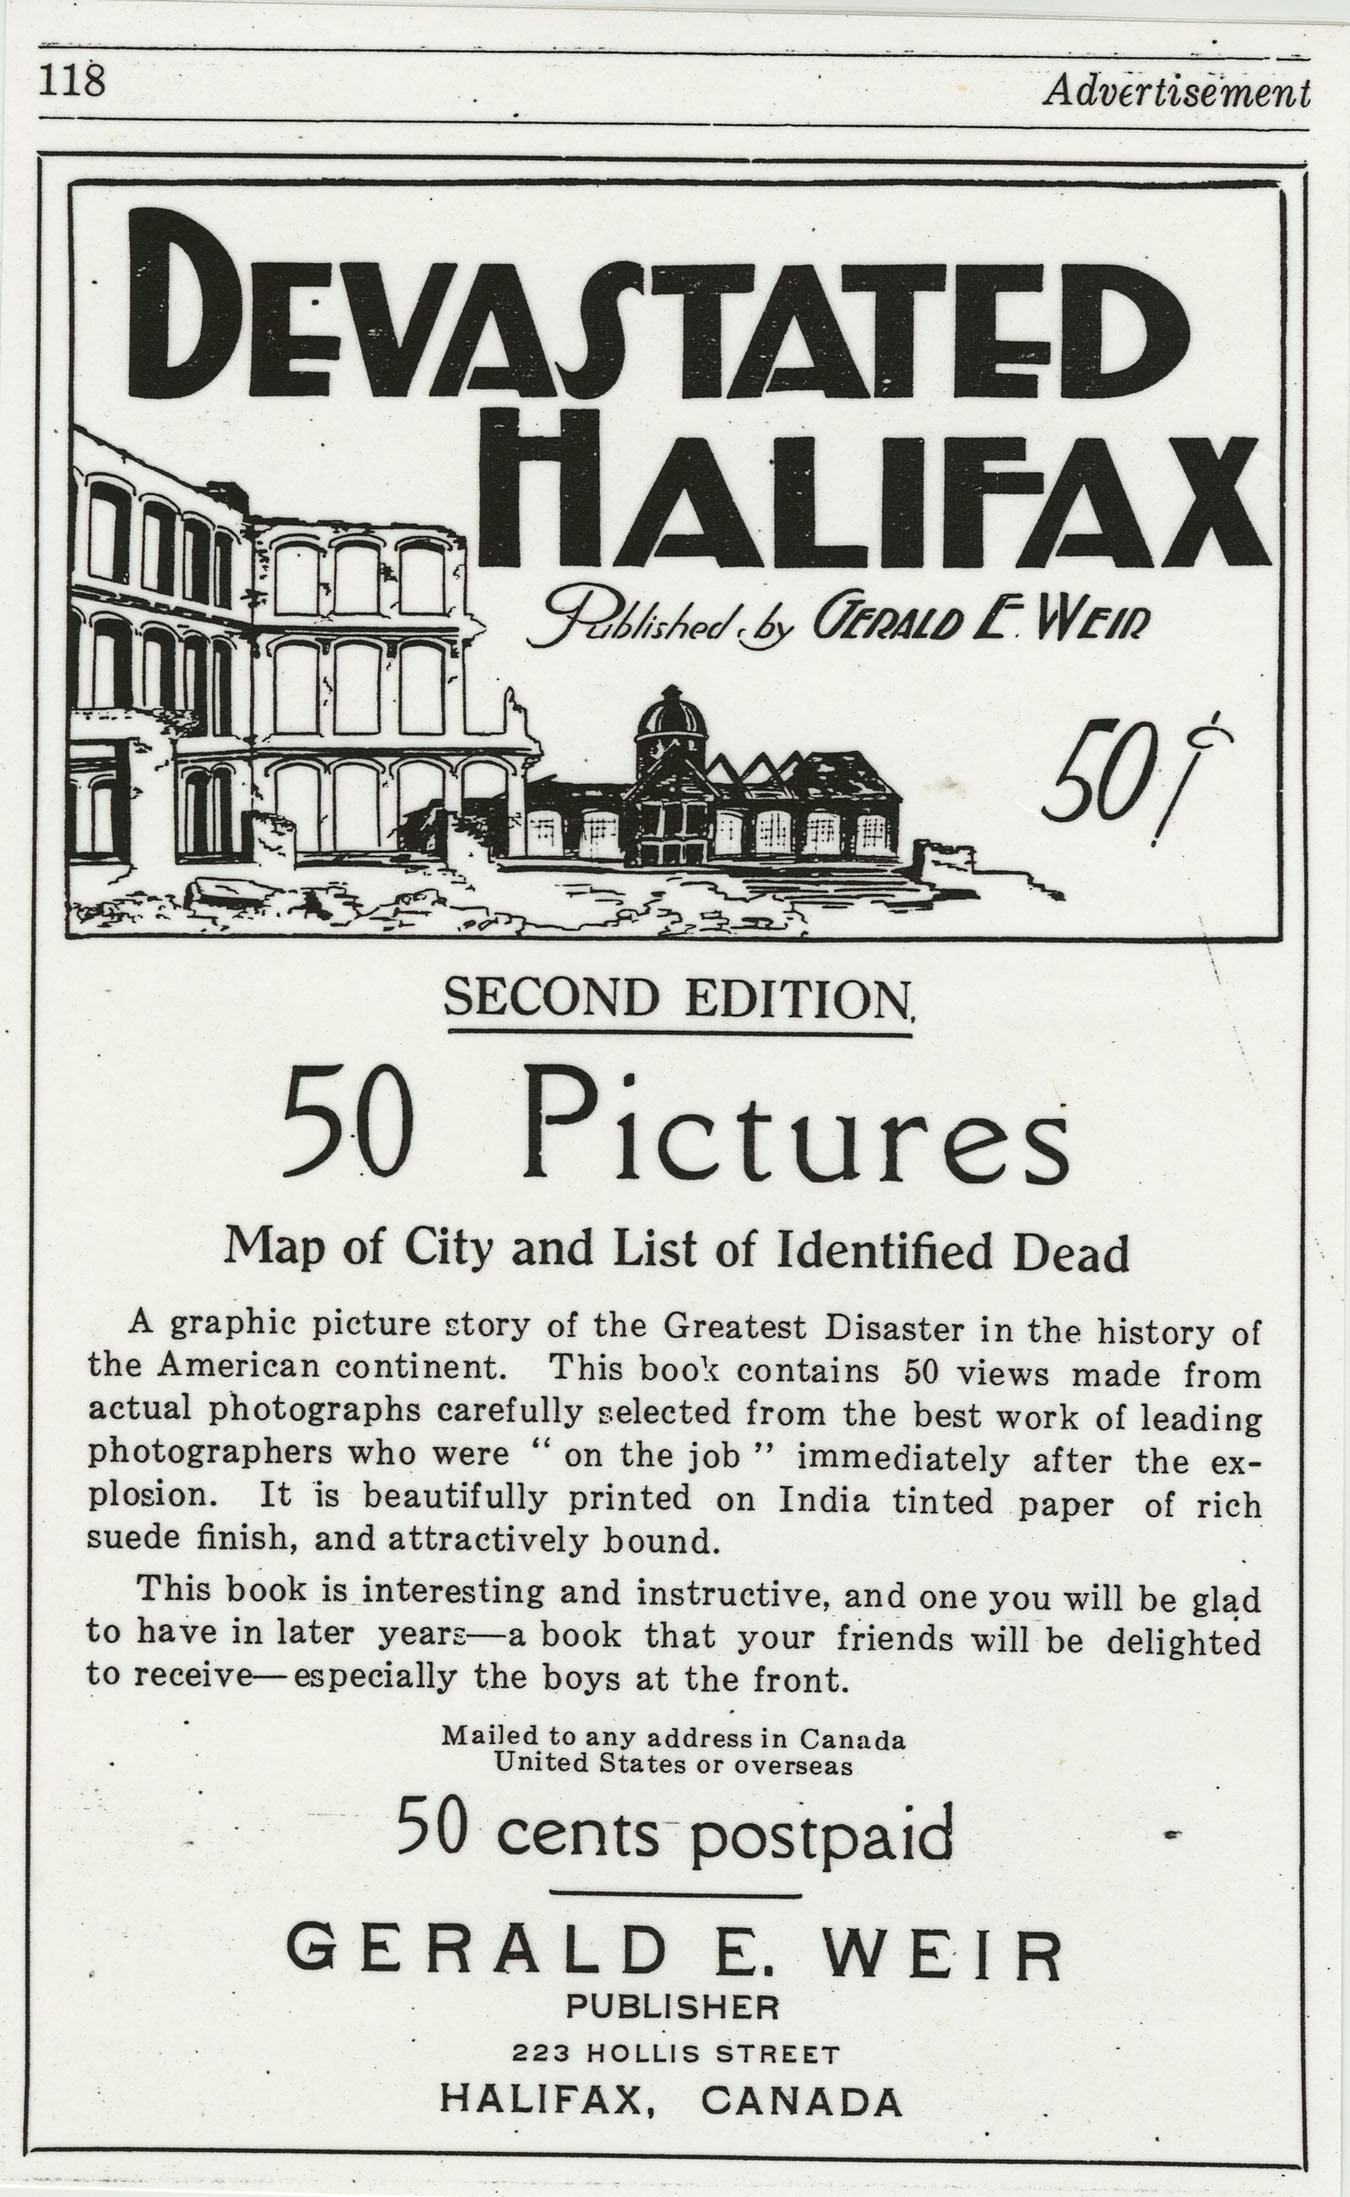 Taken from Stanley K. Smith, <i>Heart Throbs of the Halifax Horror</i> (Halifax, 1918), p.118.